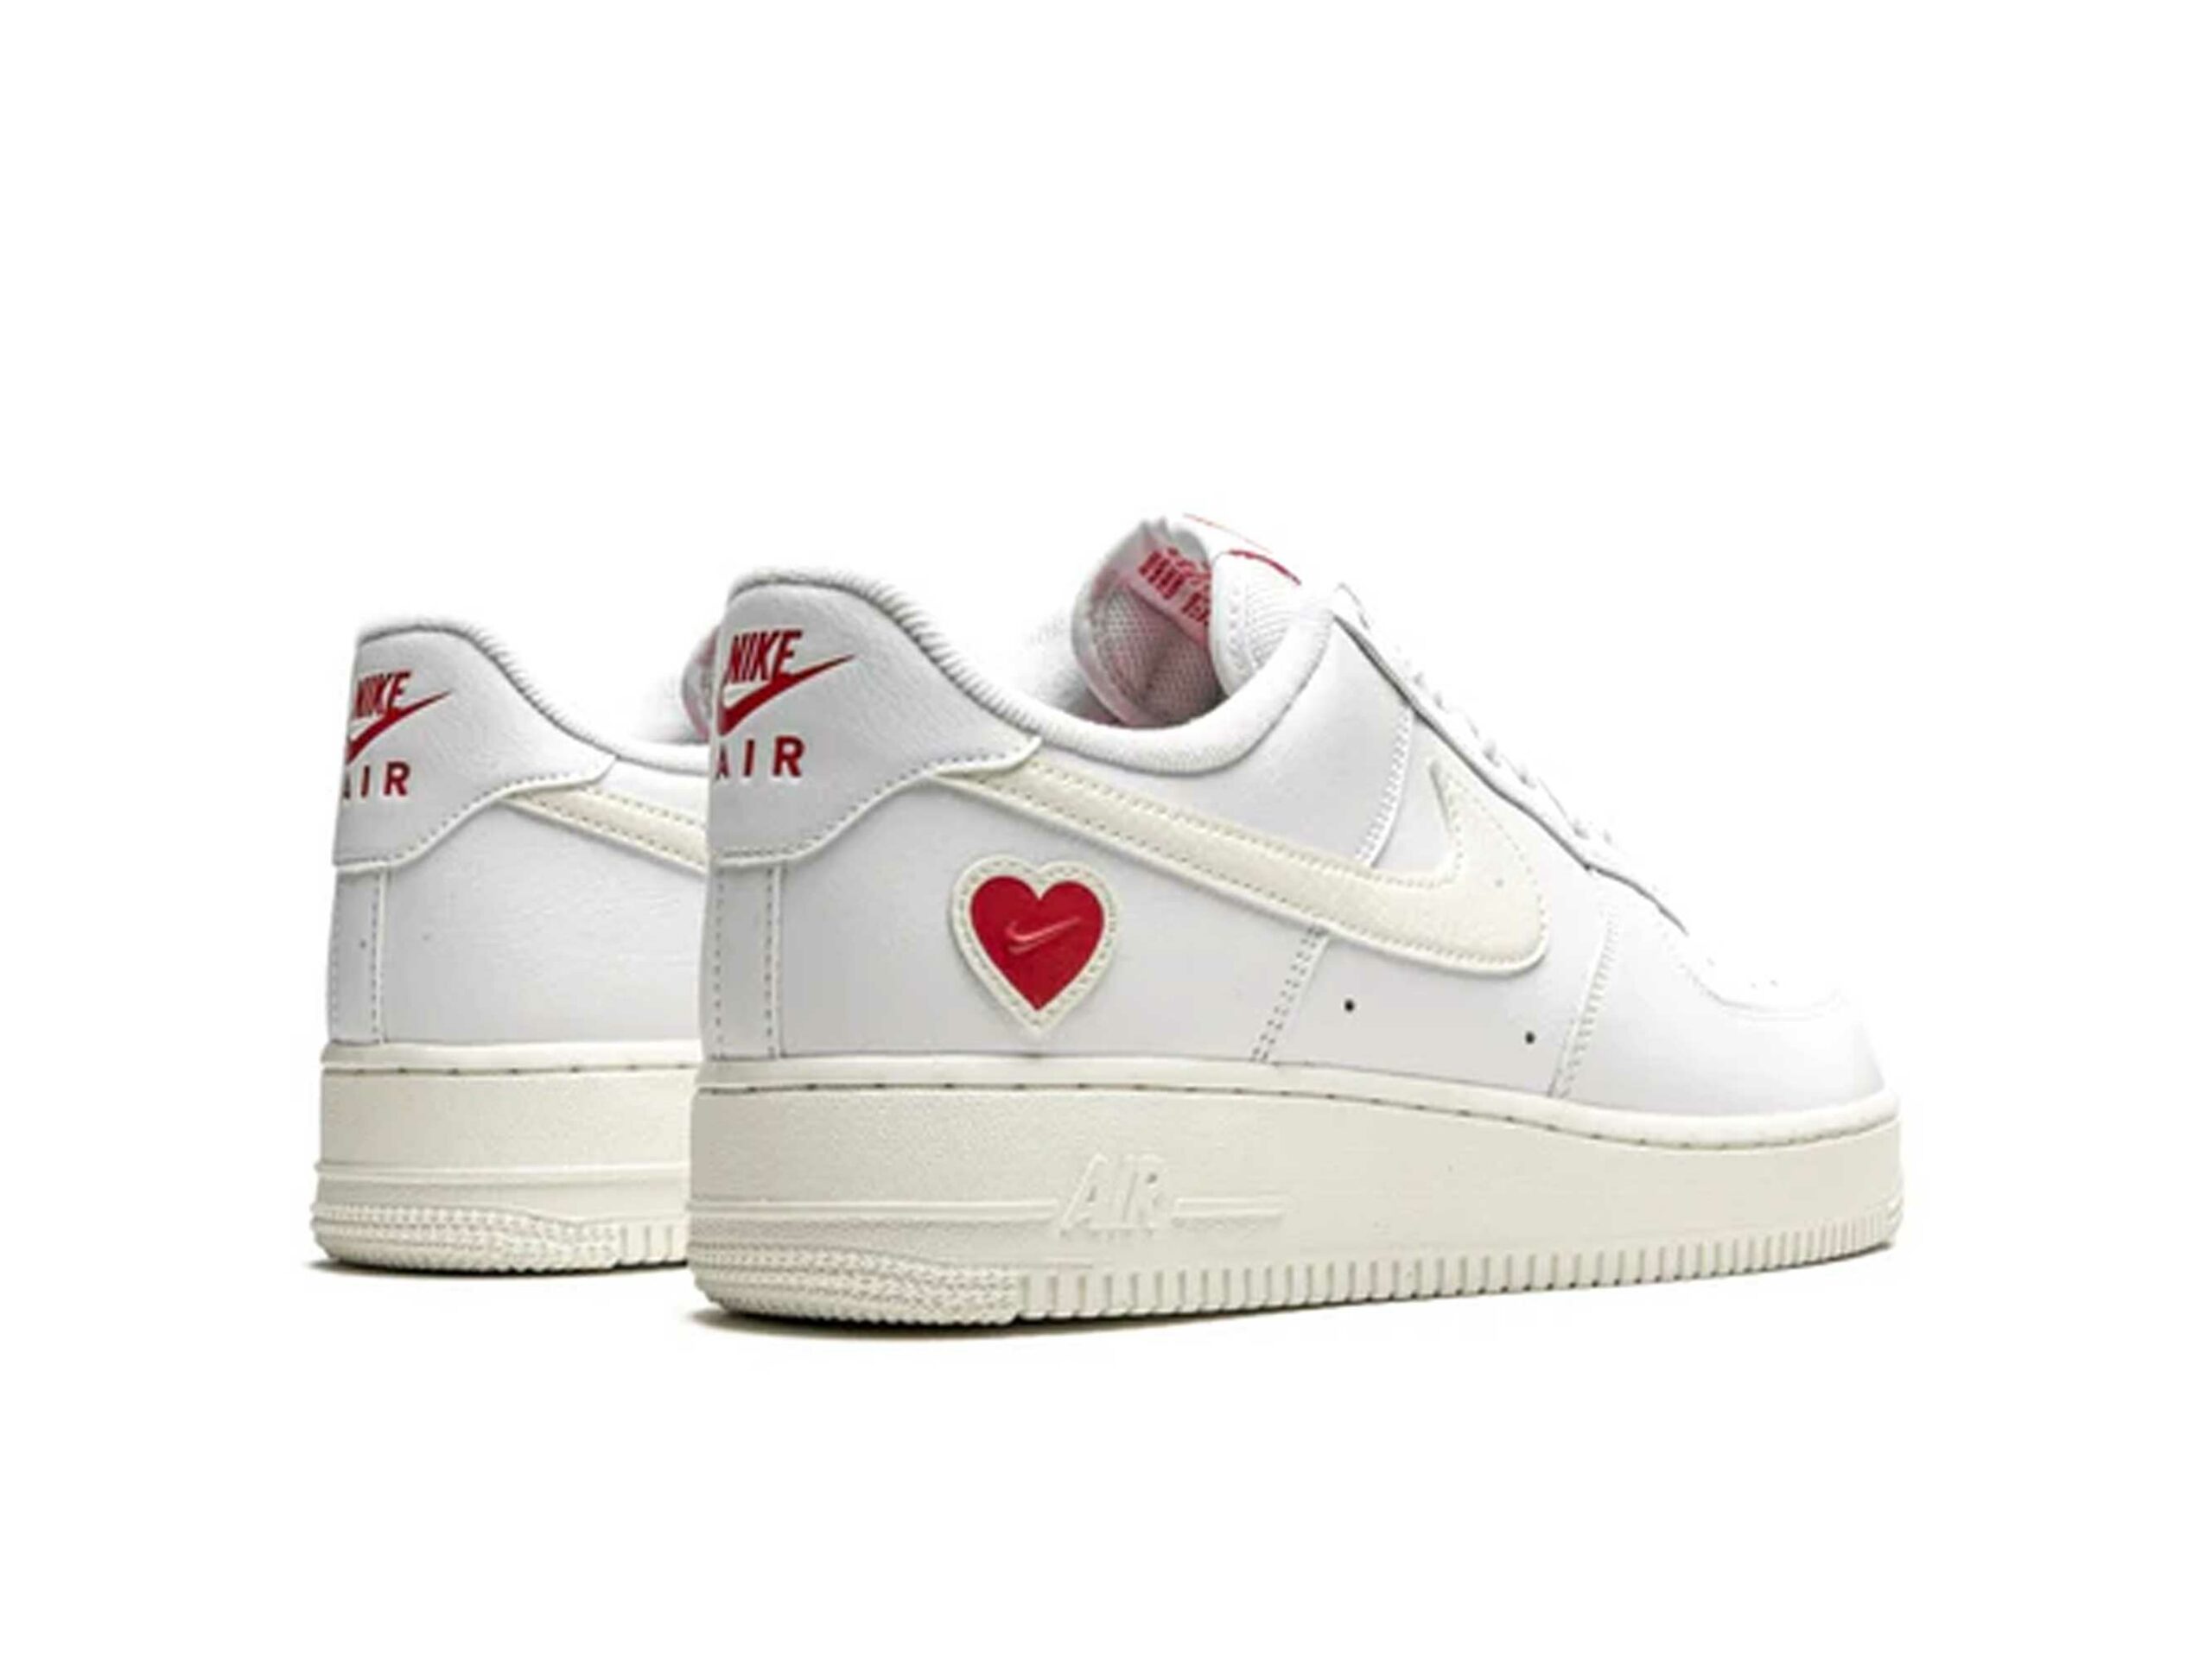 Nike air force low valentine s day. Nike Air Force 1 Low Valentines Day 2021. Nike Air Force 1 Low “Valentine’s Day” 2023. Nike Air Force 1 Valentines Day 2021. Nike Air Force 1’07 “Valentines Day” (2021).